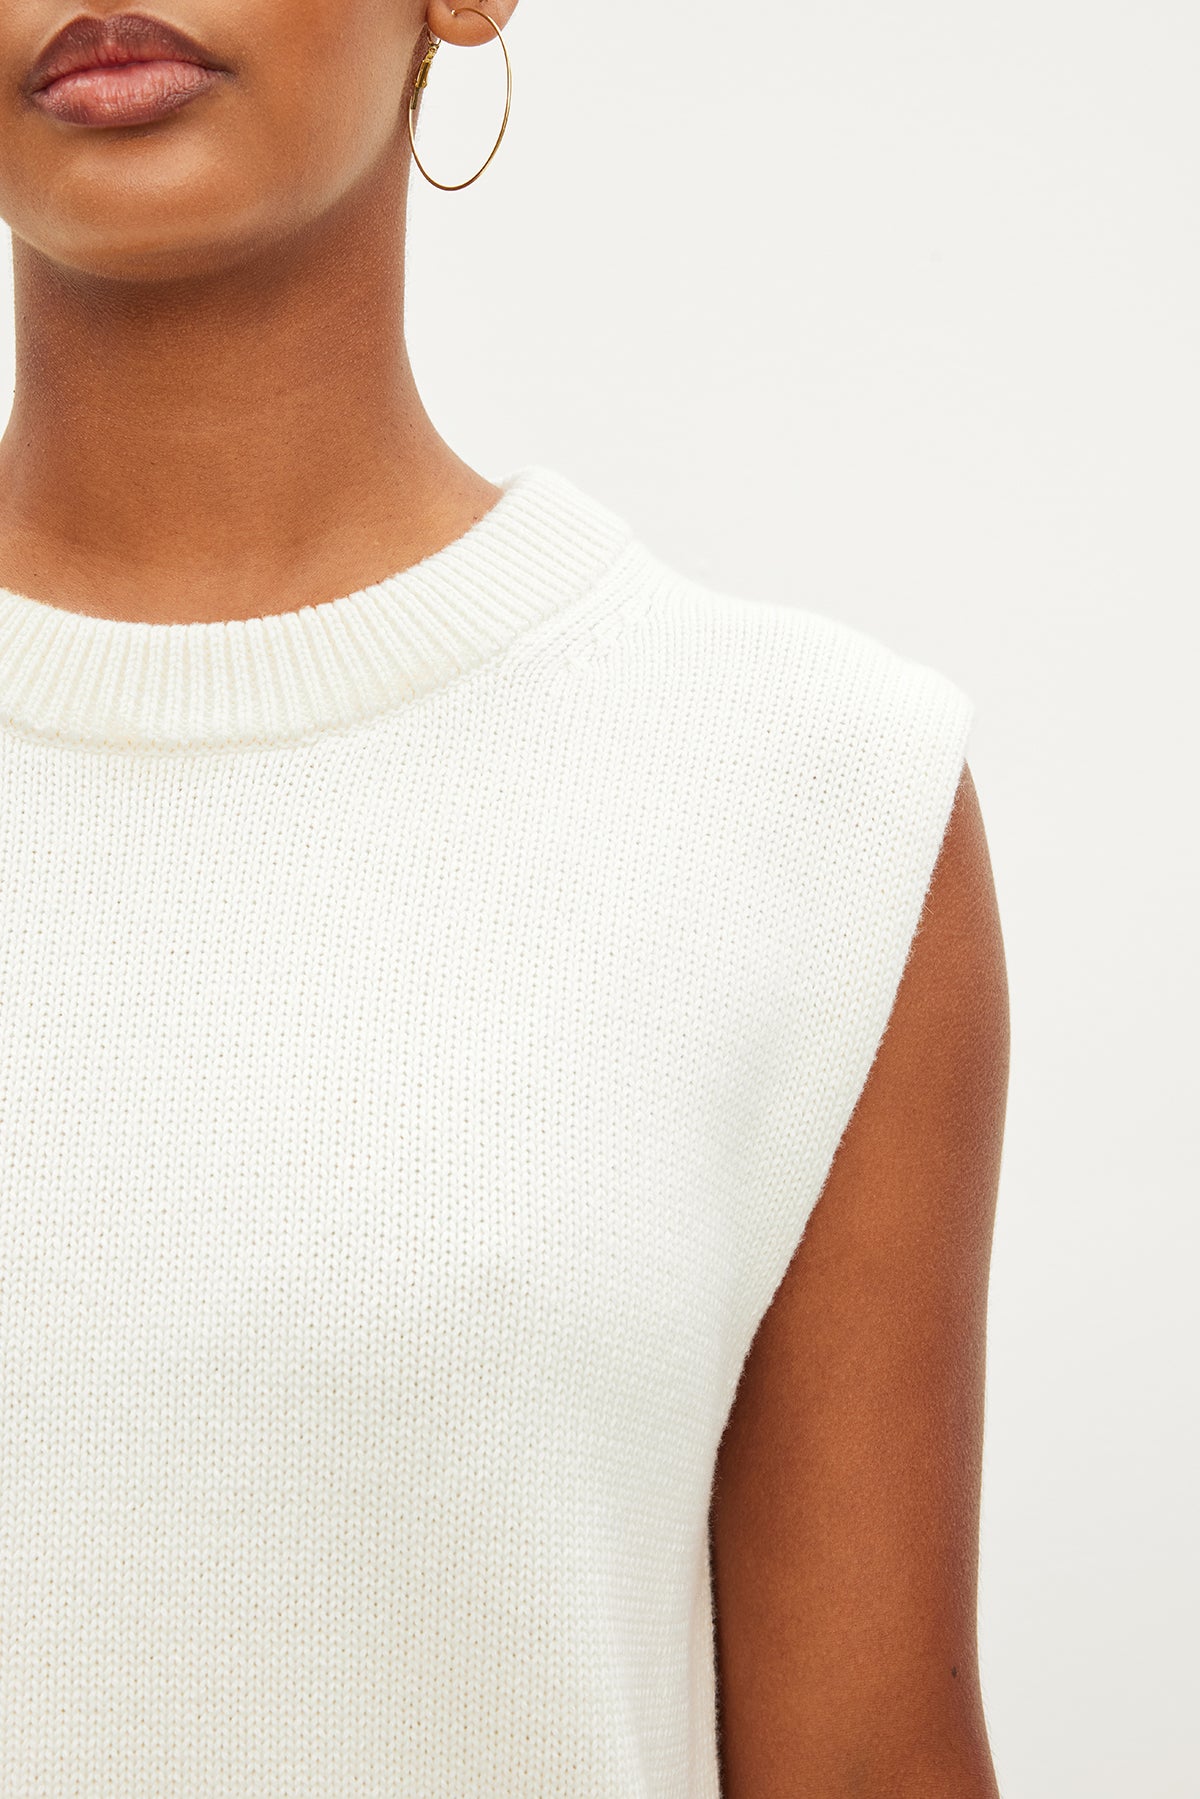 A woman in a luxurious white Velvet by Graham & Spencer ASTER CREW NECK SWEATER, crafted from a blend of cotton and cashmere for ultimate comfort.-35955418497217